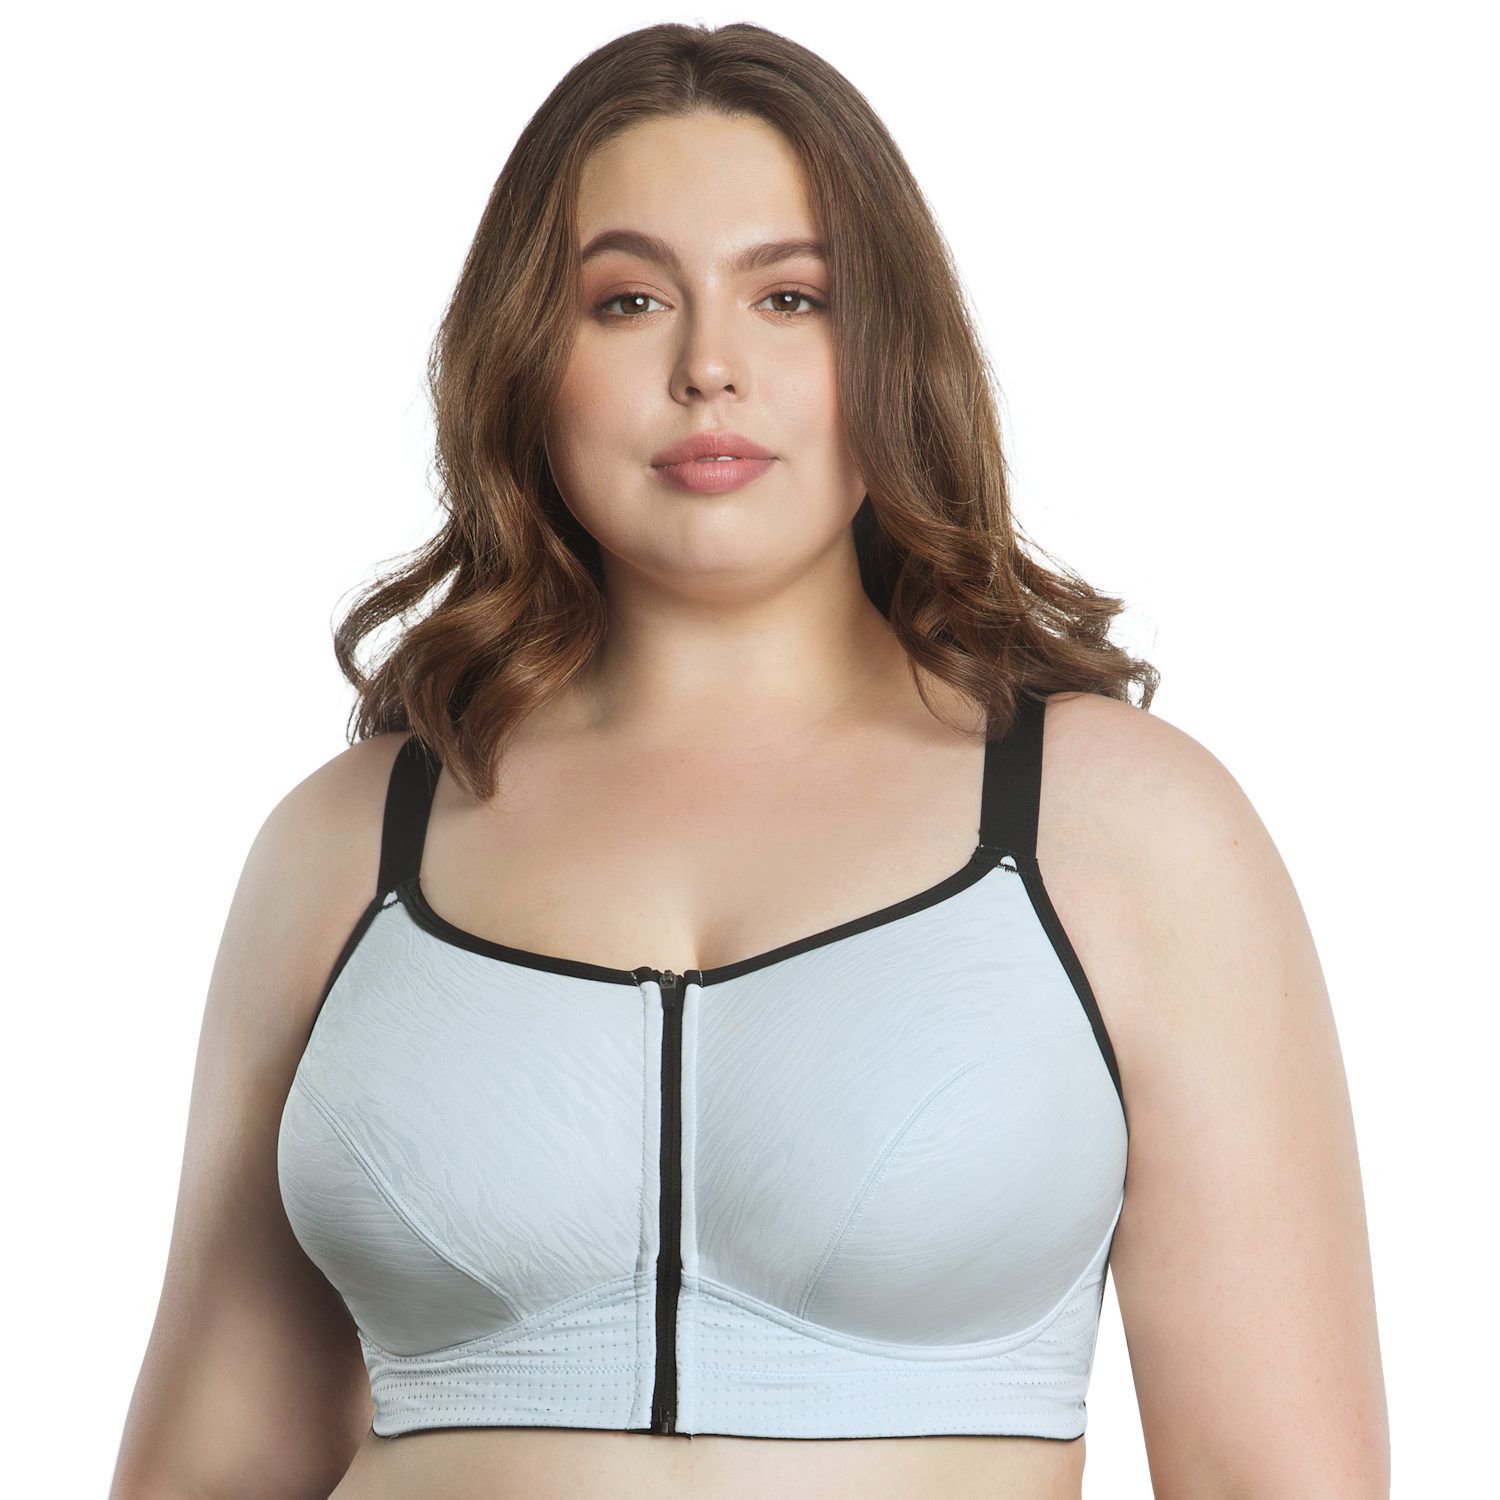  LIHWKD Front Zipper Bra,Full-Coverage No Underwire Snug Fit Bras,Women's  Zip Front Closure Sports Bra (Apricot,36/80) : Clothing, Shoes & Jewelry